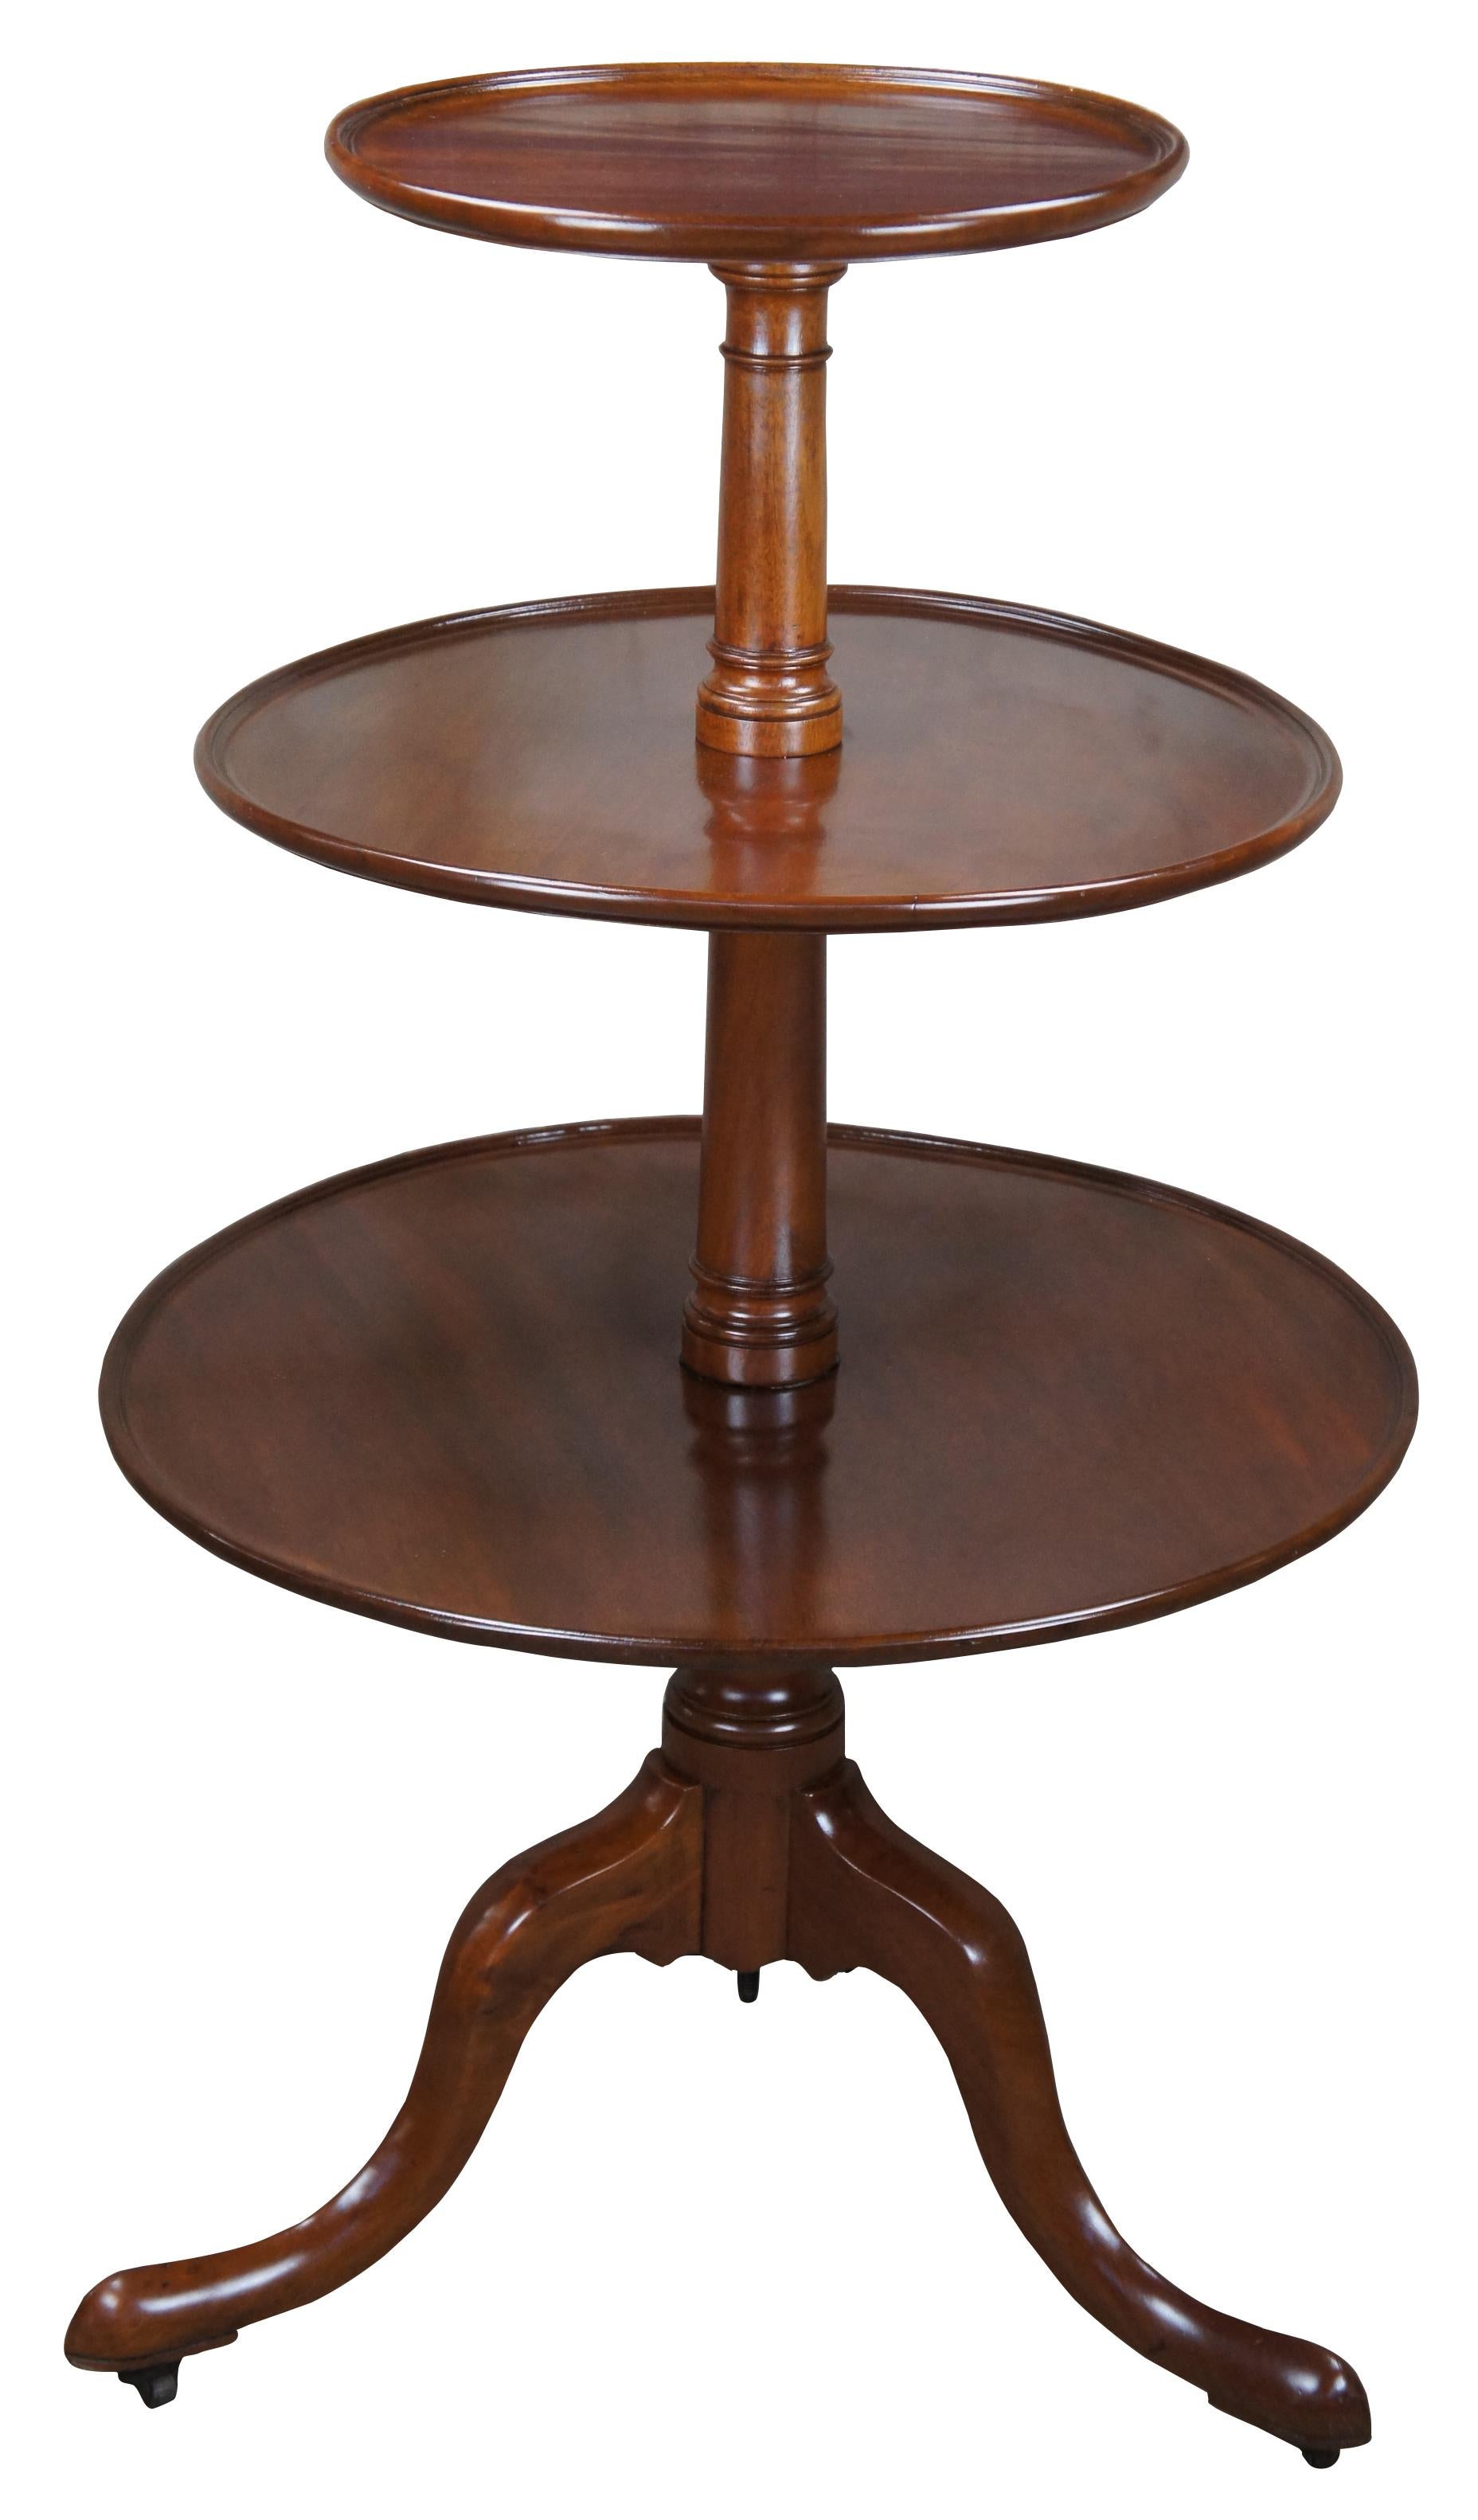 Antique 19th century three tiered dumbwaiter or butlers table. Made of mahogany featuring Queen Anne styling with a round tapered column and serpentine legs w slipper feet and castors.

Measures: 25.5